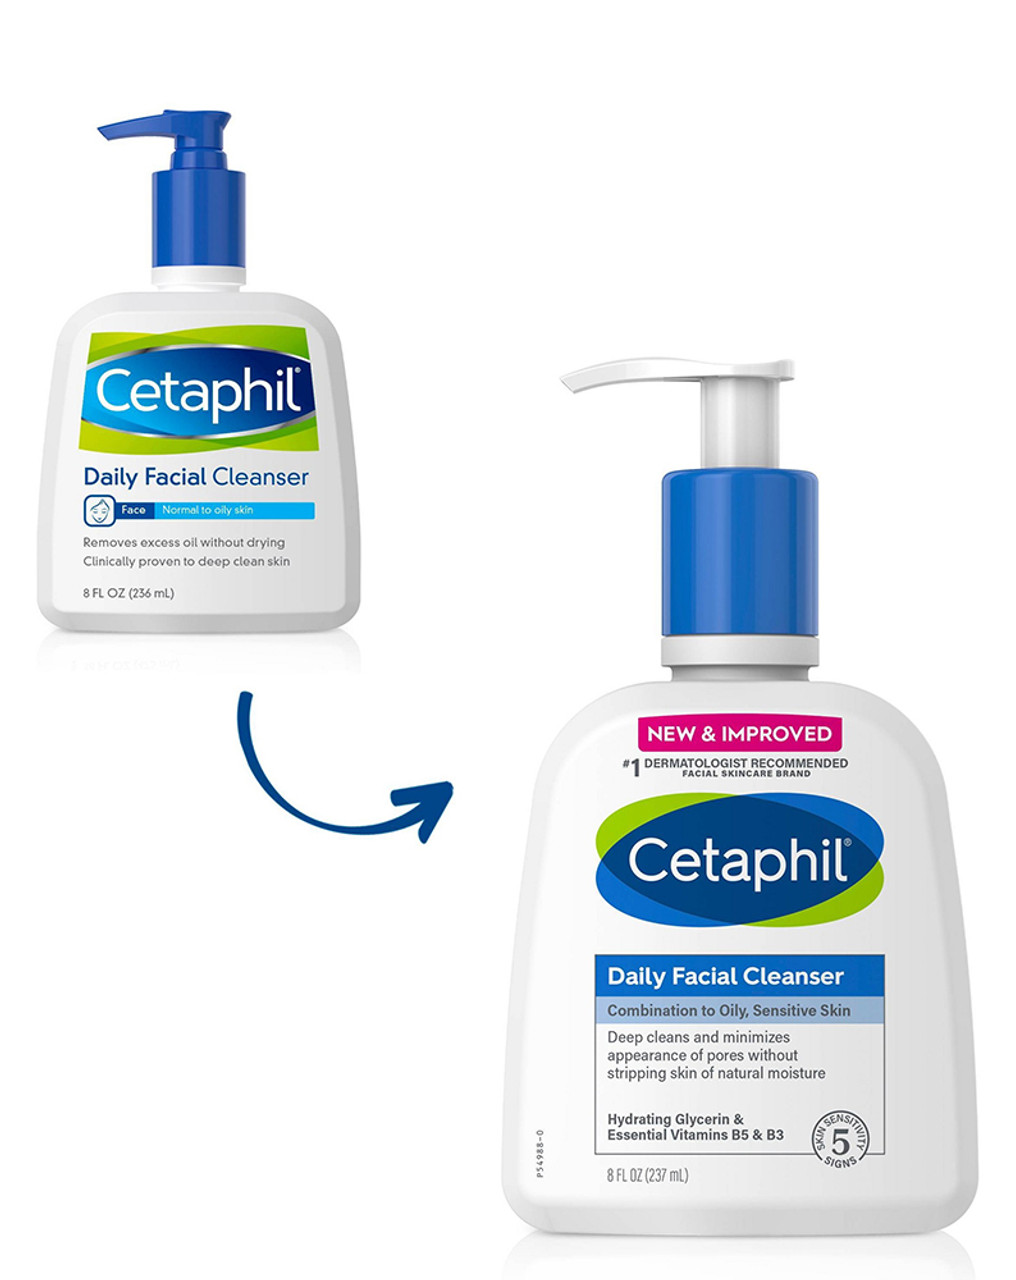 Skincare brand Bubble is challenging CeraVe and Cetaphil